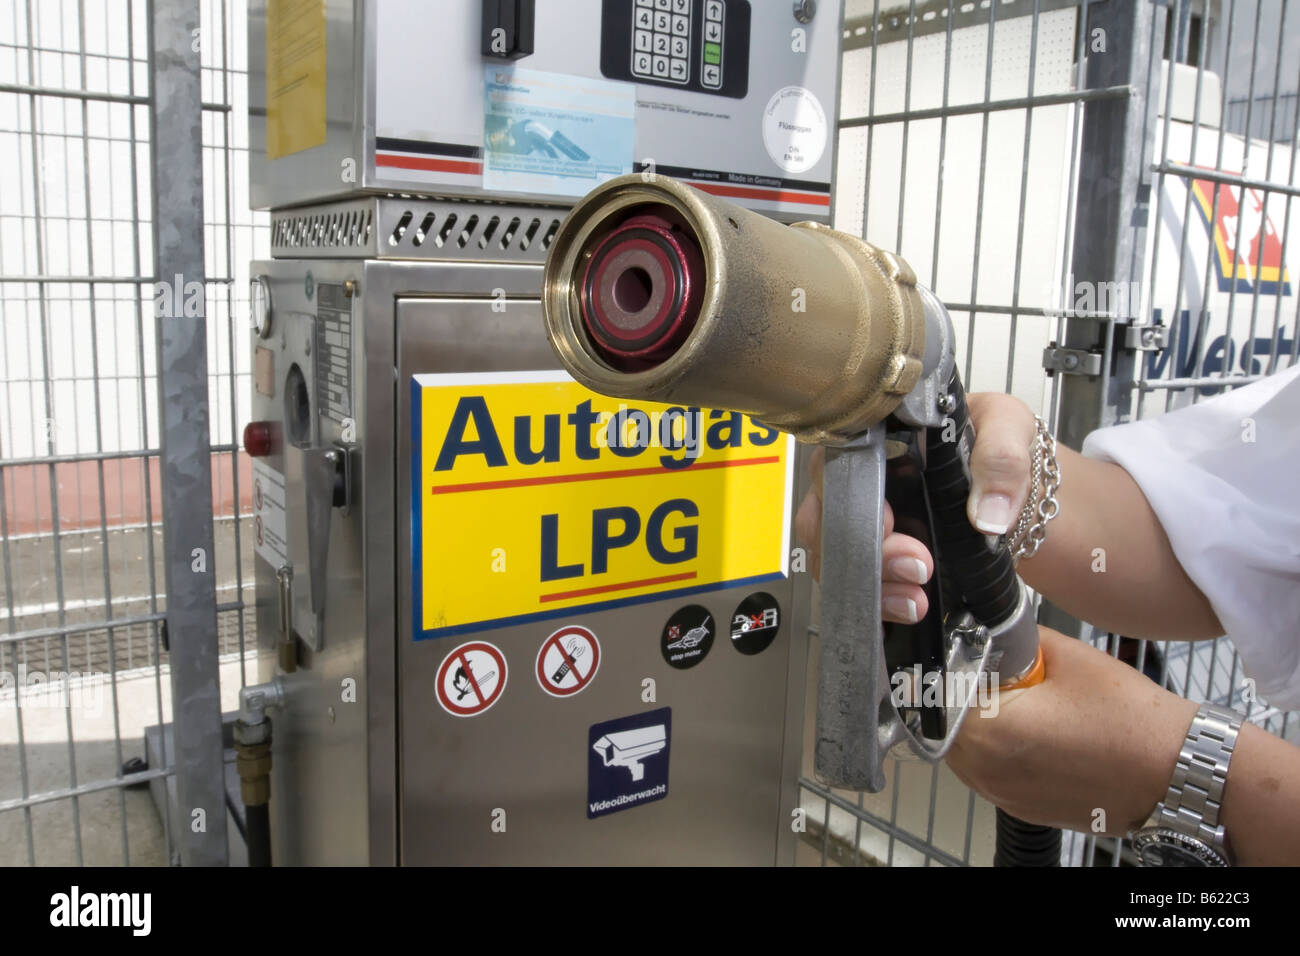 Gas pump, gas station for liquefied petroleum gas or LPG, Germany Stock  Photo - Alamy